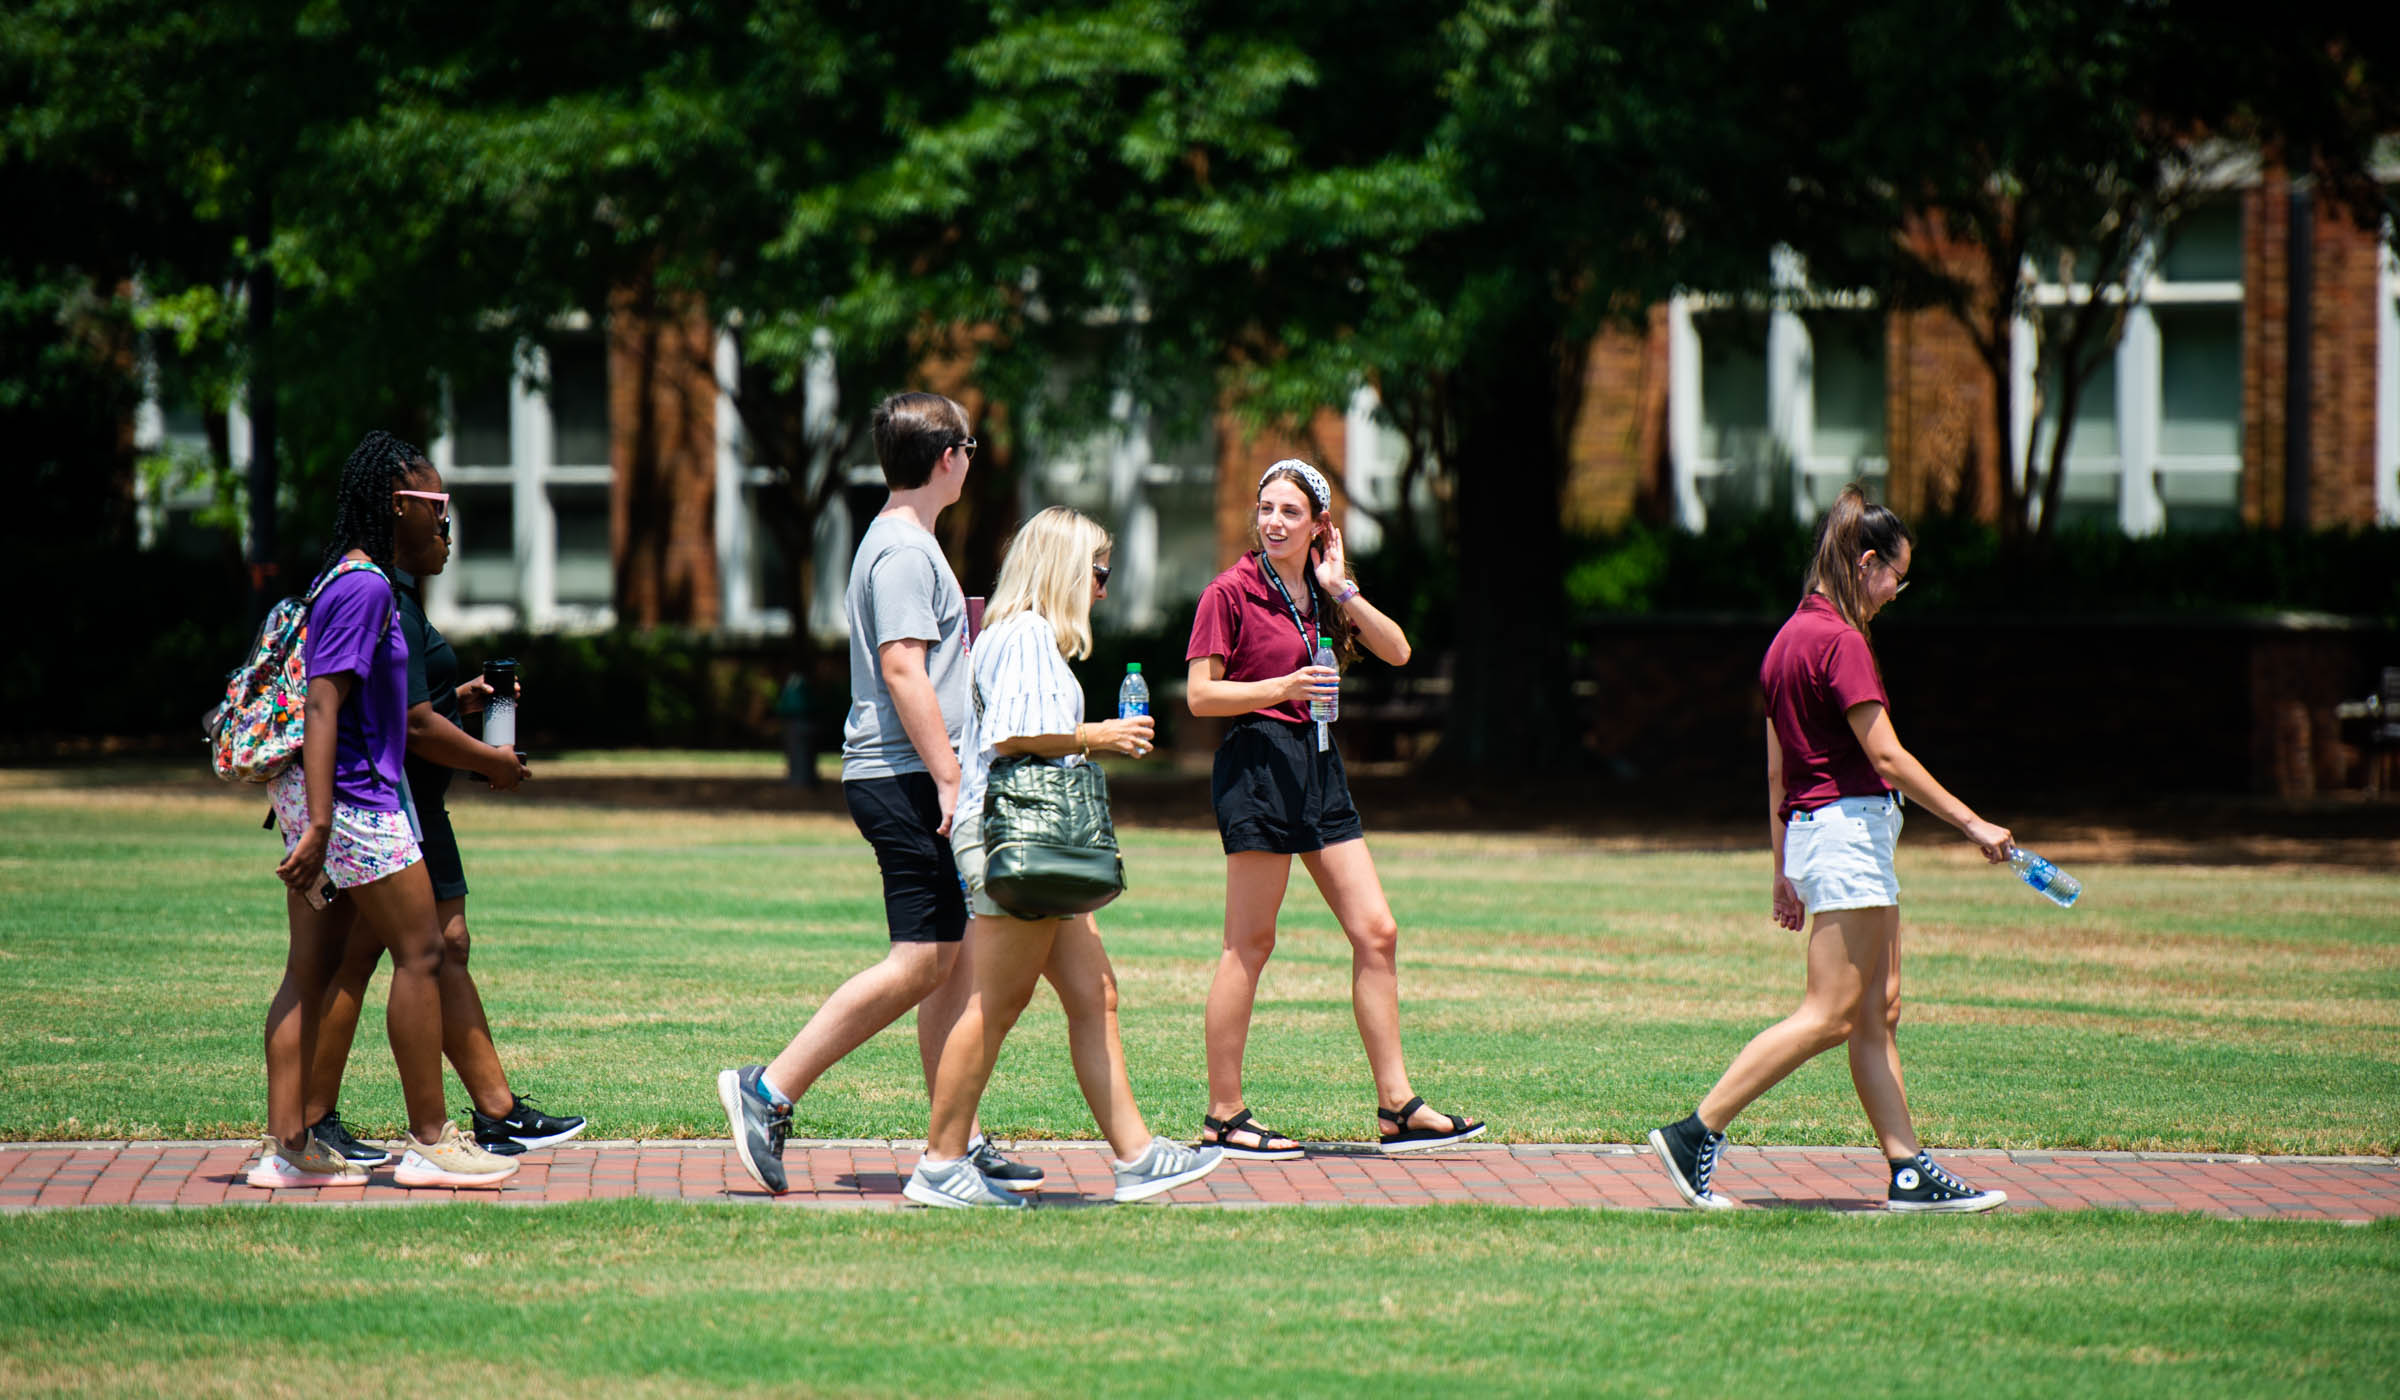 MSU roadrunner Lauren Weaks leads a guided walking group tour for 4 incoming students across the Drill Field.